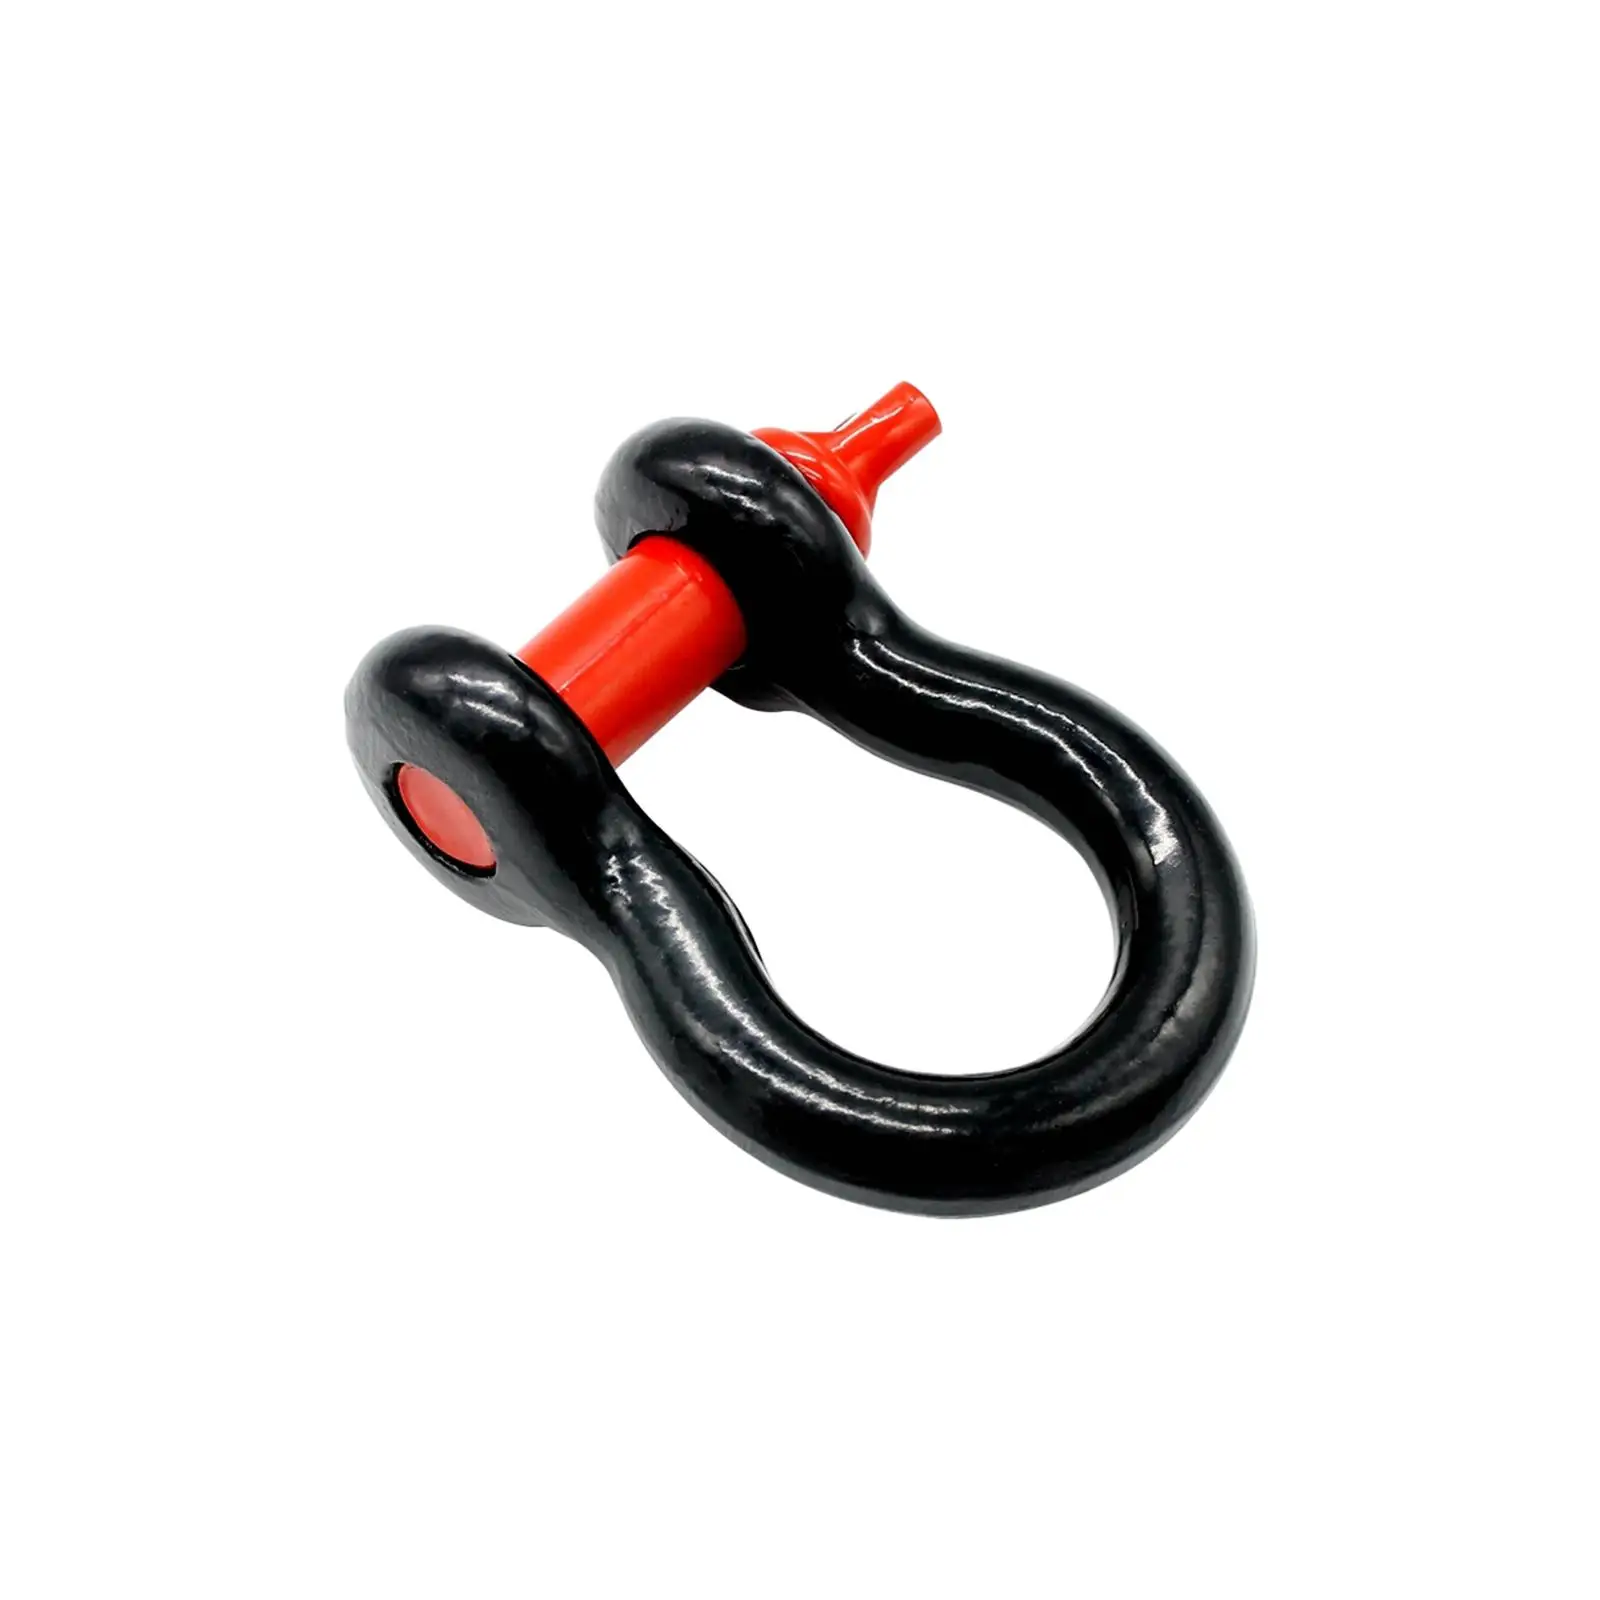 Tow Hook Ring Accessories D Ring Front Tow Hook for Winch Accessories Vehicle Vehicle Recovery Convenient Installation